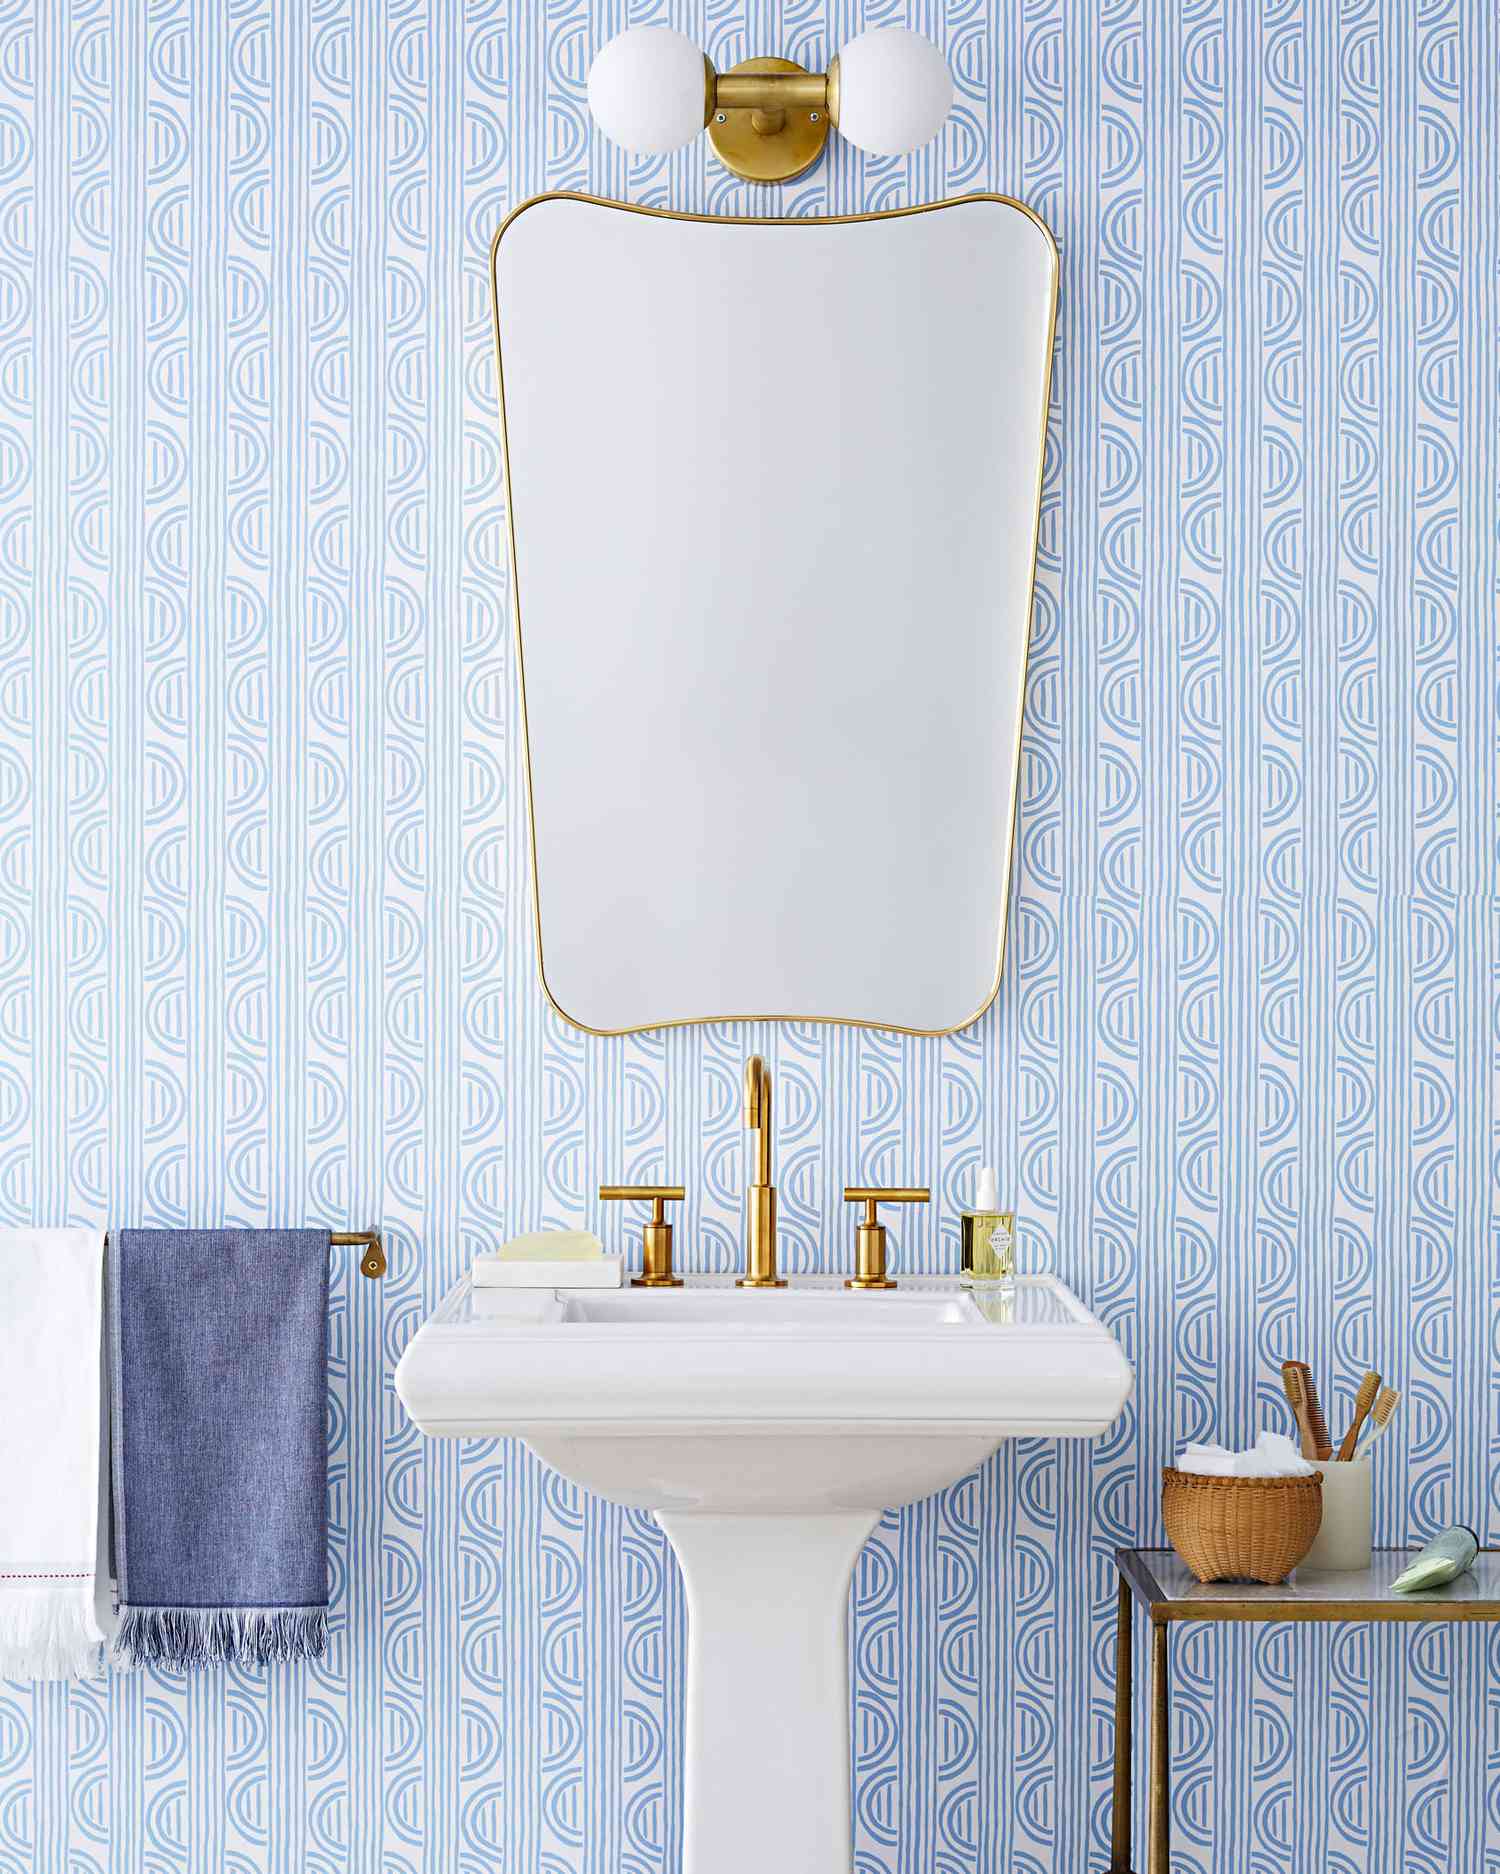 Bathroom Paisley Wallpaper Bright Home Decor Removable Colorful Fabric Wallpaper Peel and Stick Wallpaper Self Adhesive